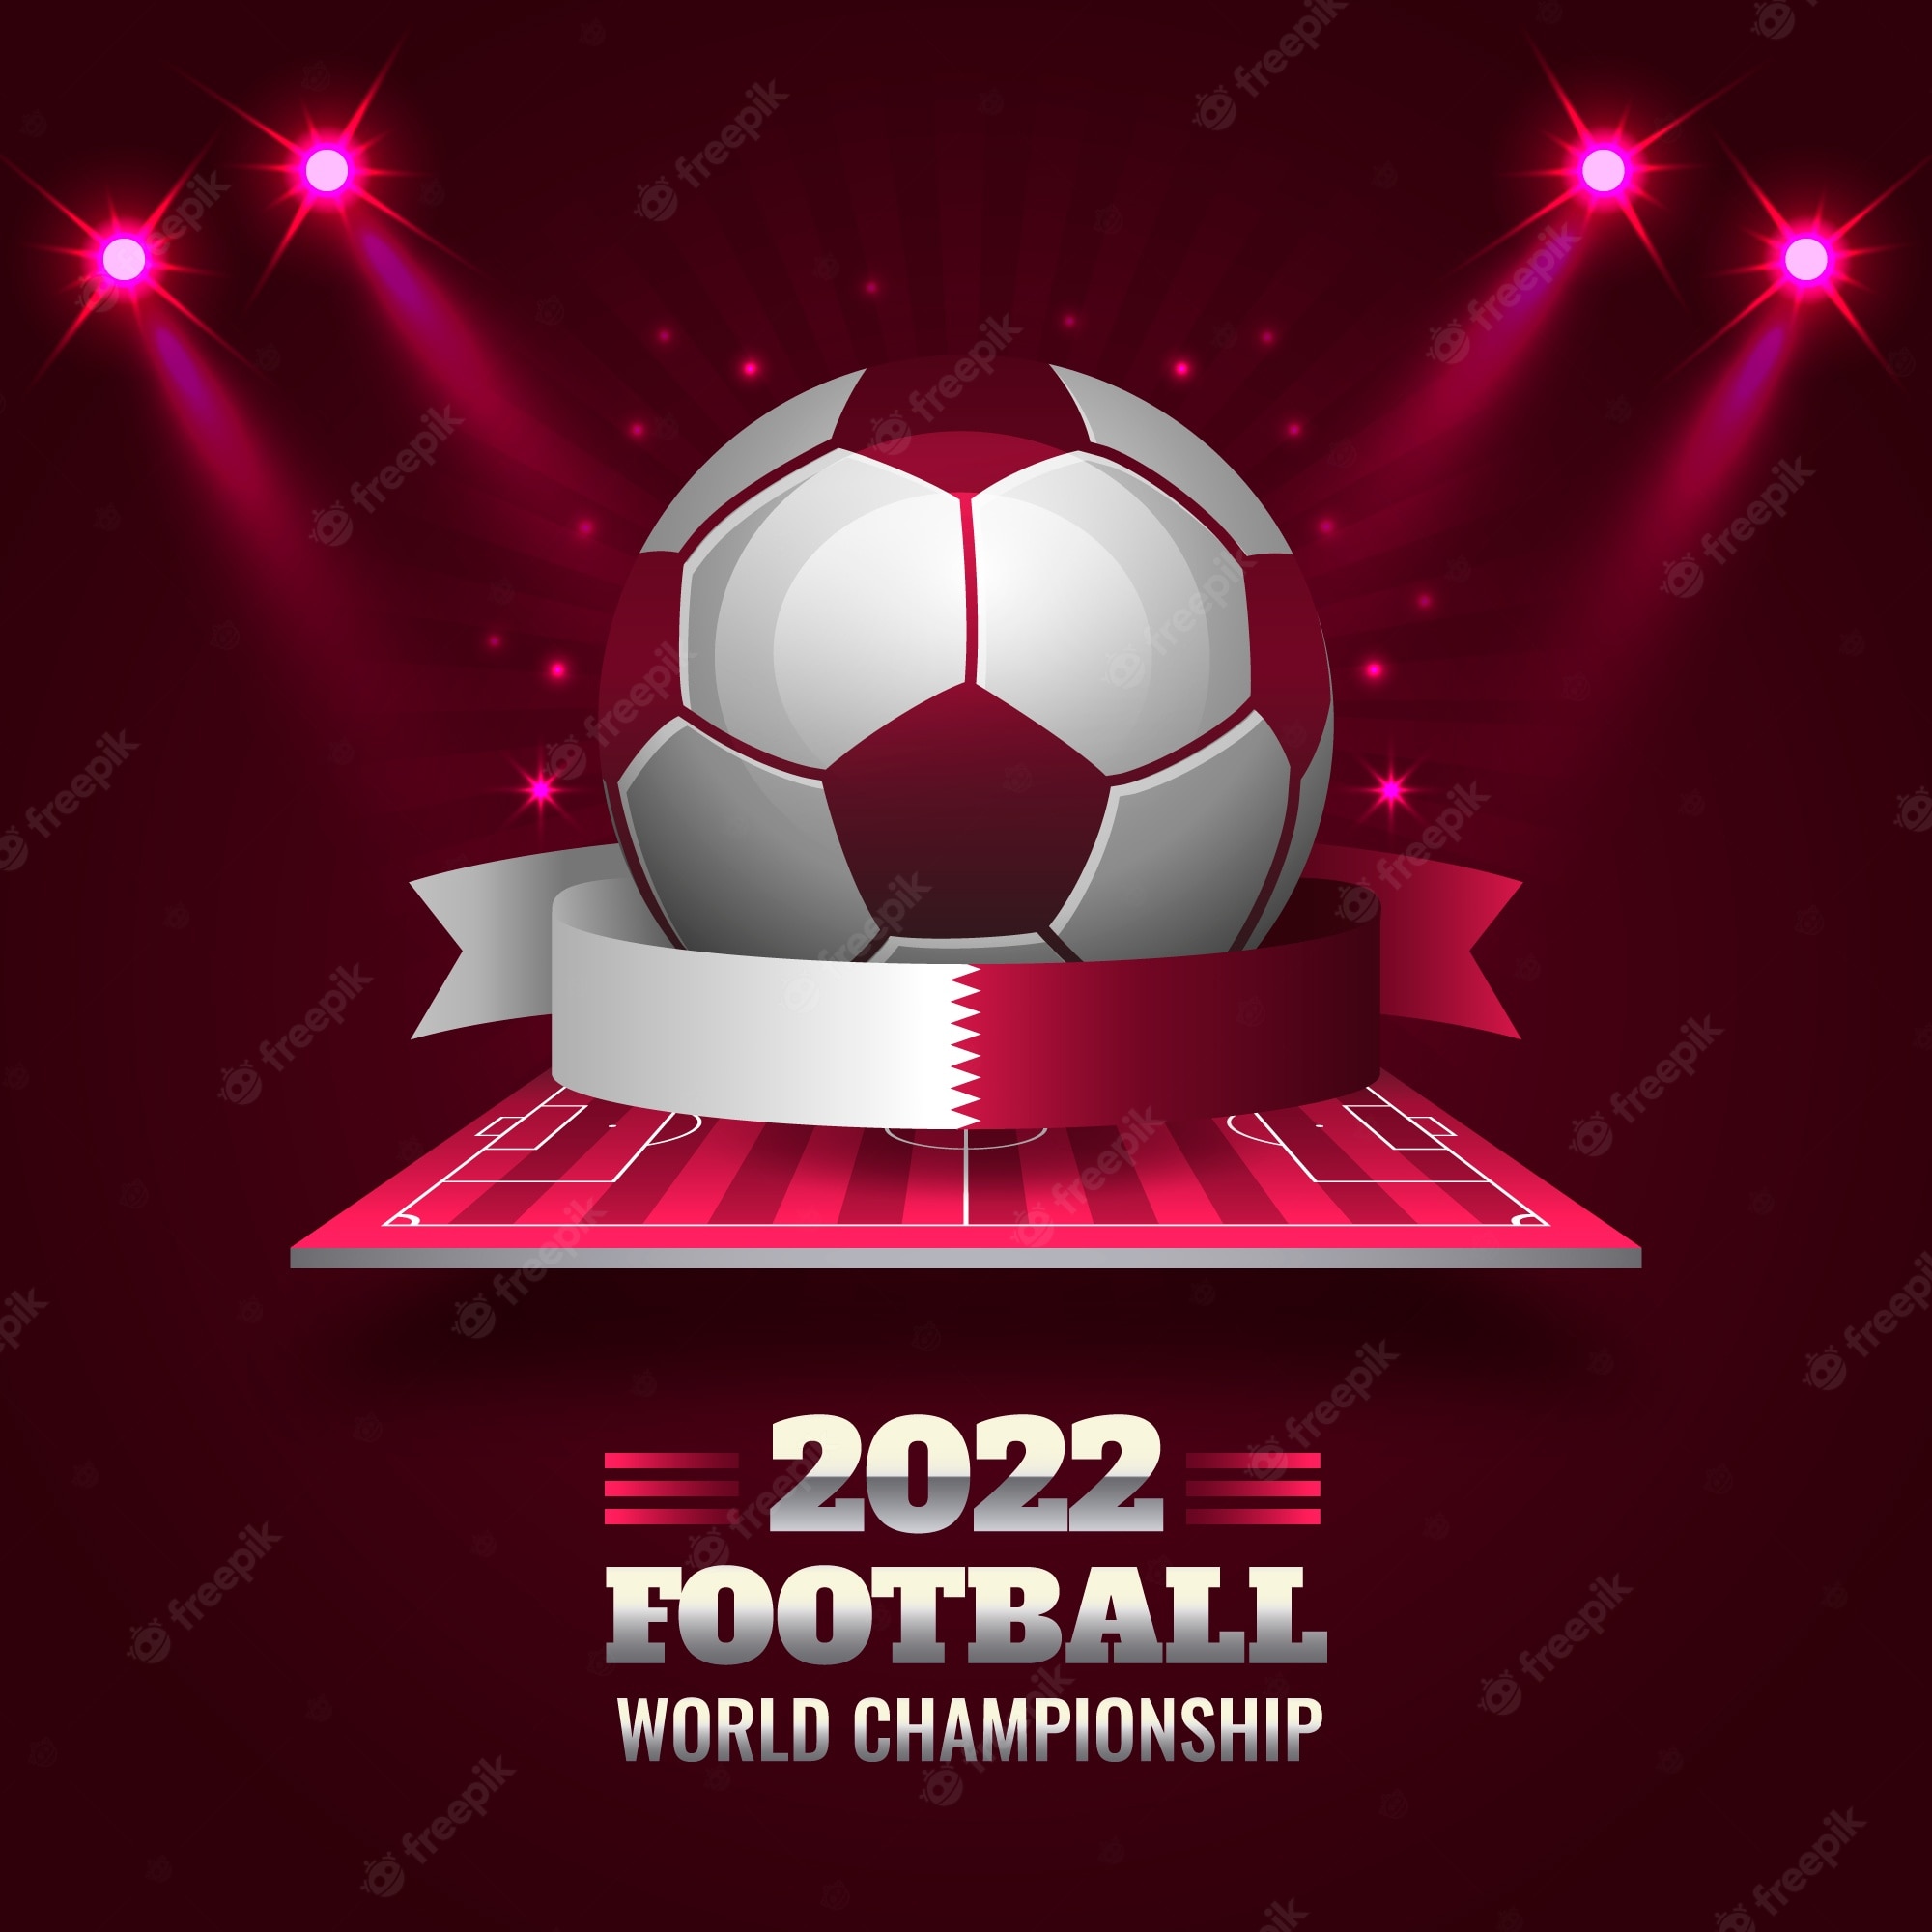 World cup 2022 Image. Free Vectors, & PSD